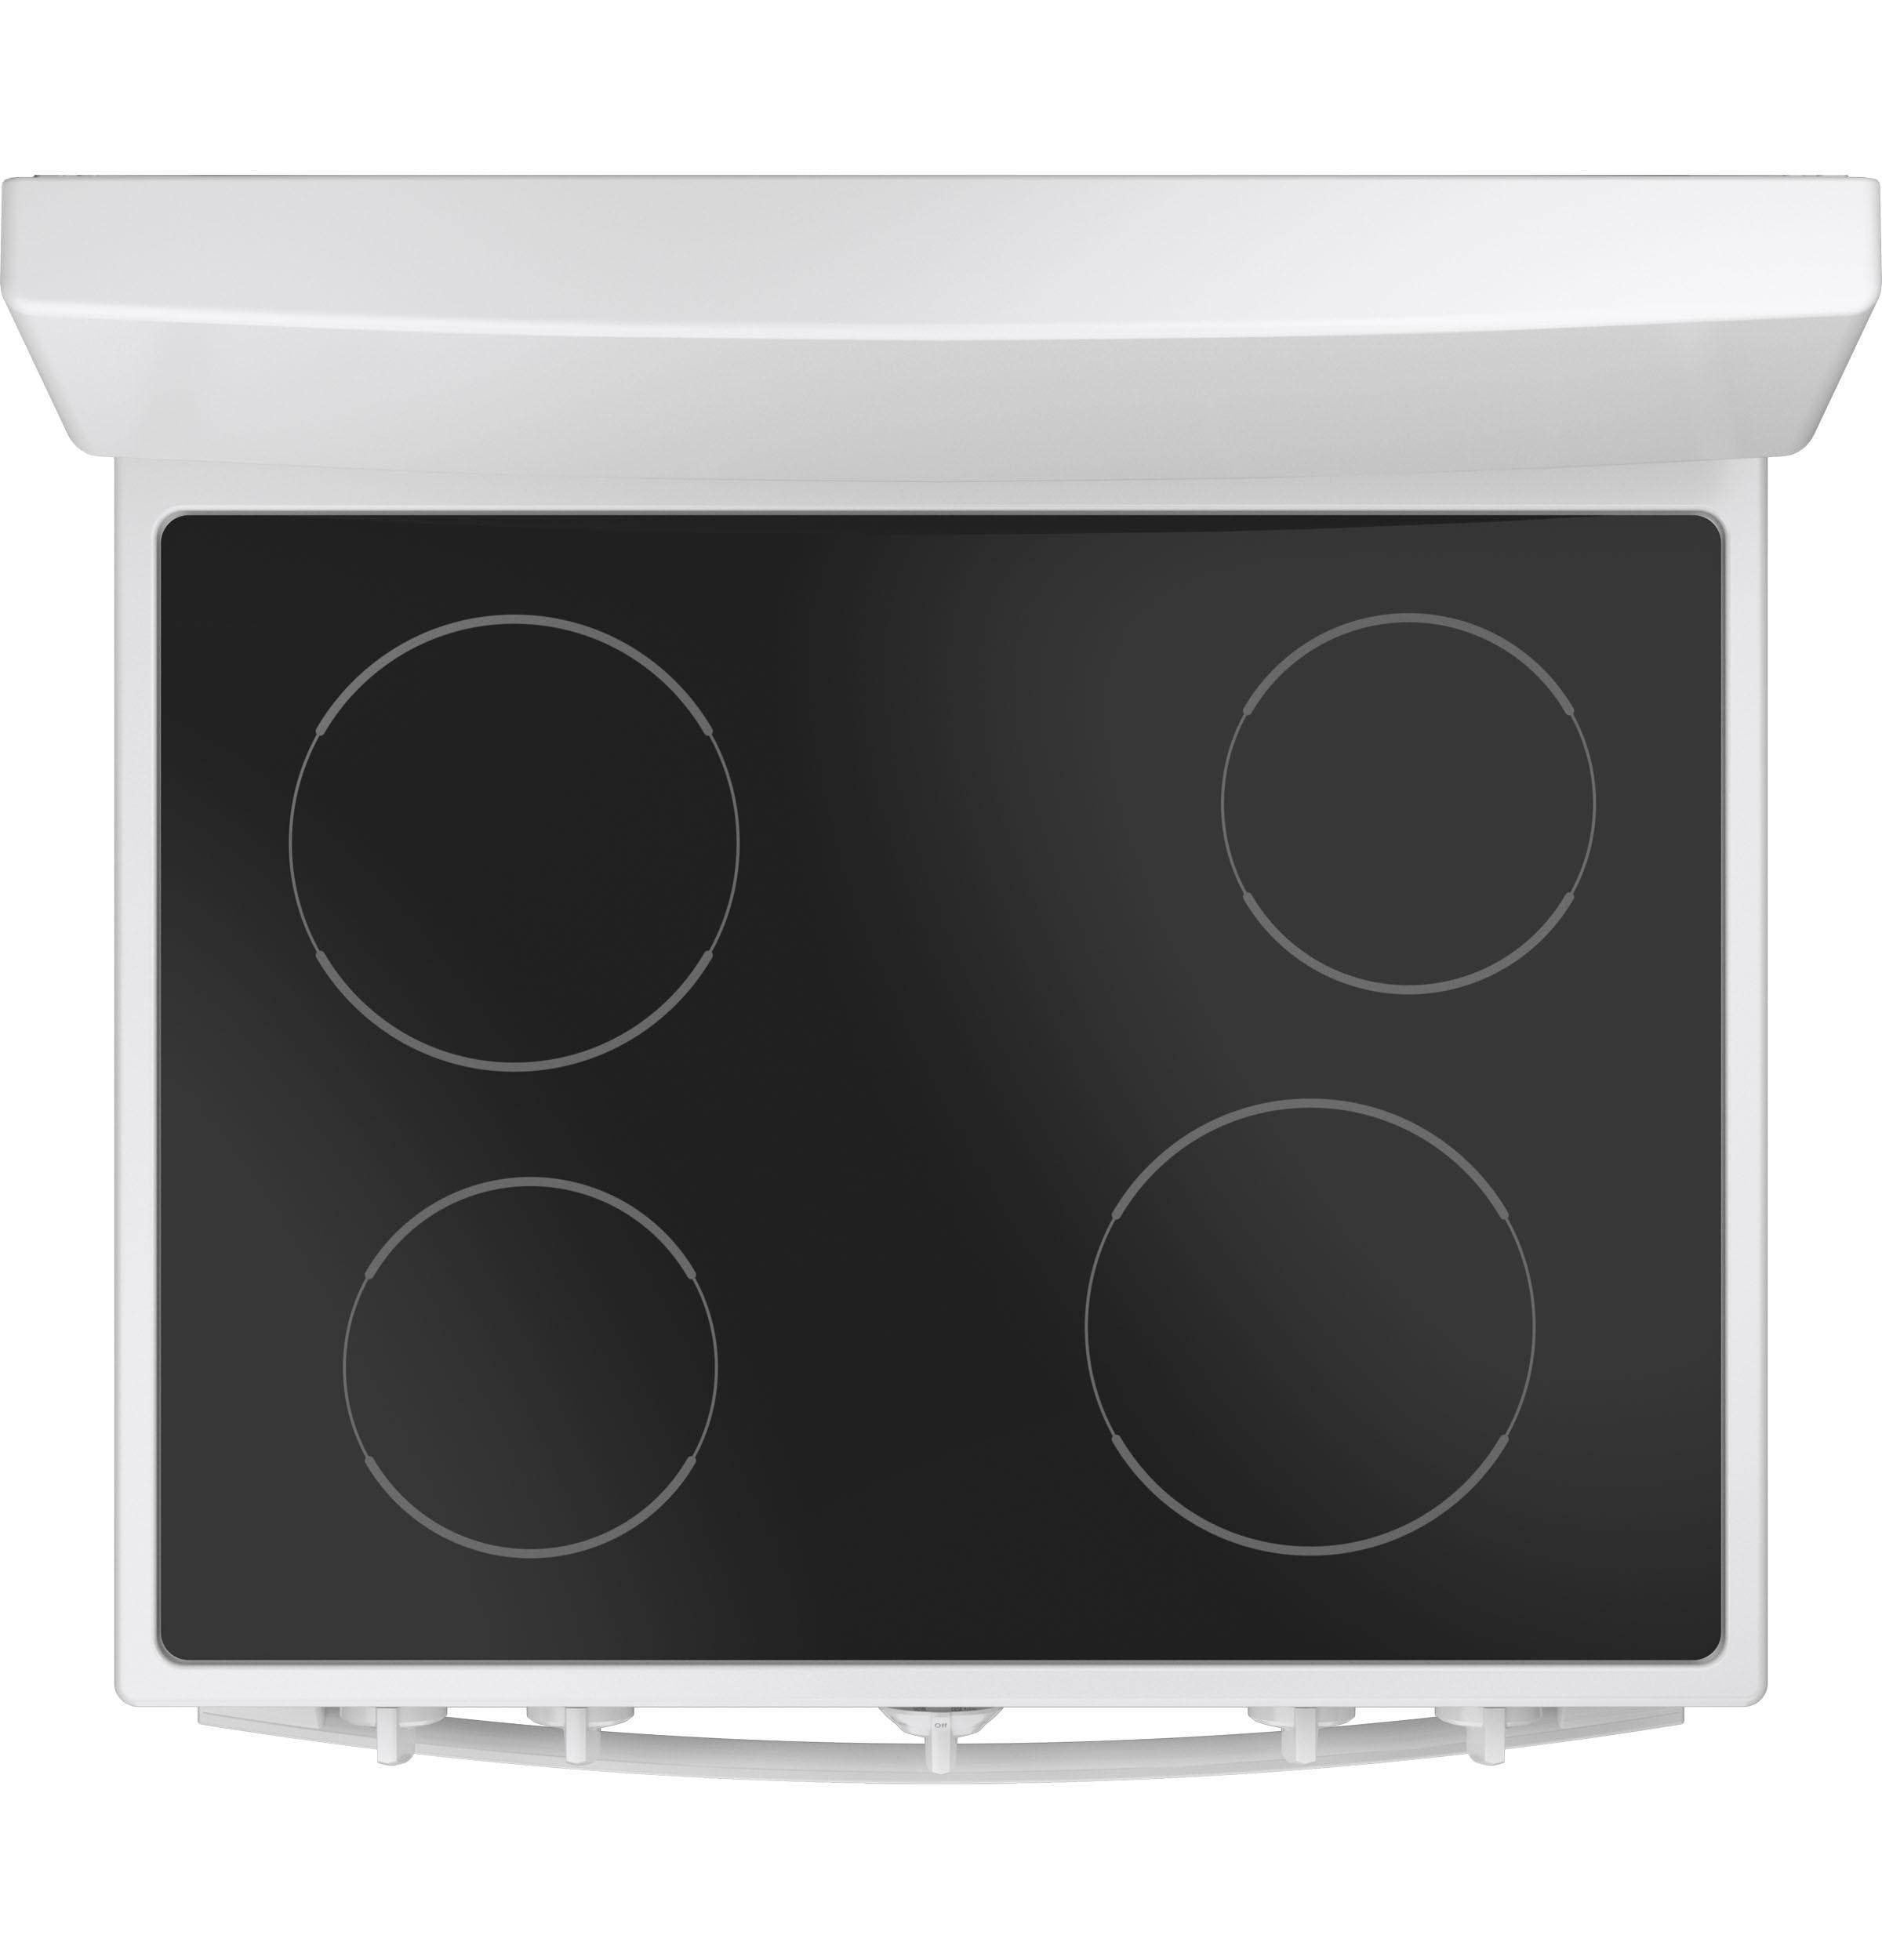 GE 30" Free-standing Electric Radiant Smooth Cooktop Range